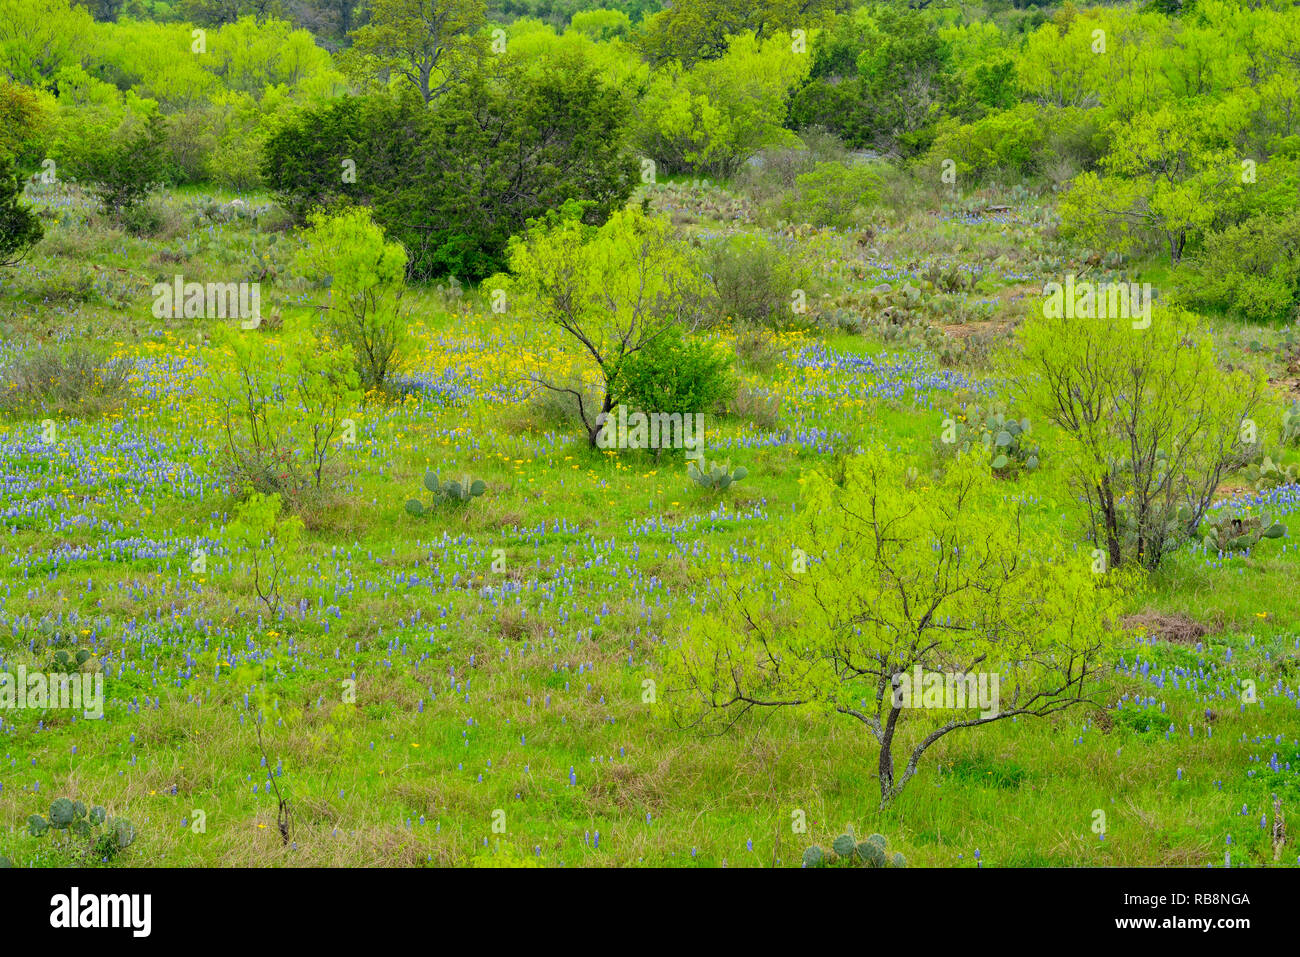 Spring foliage on mesquite trees with flowering bluebonnets, Llano County, Texas, USA Stock Photo